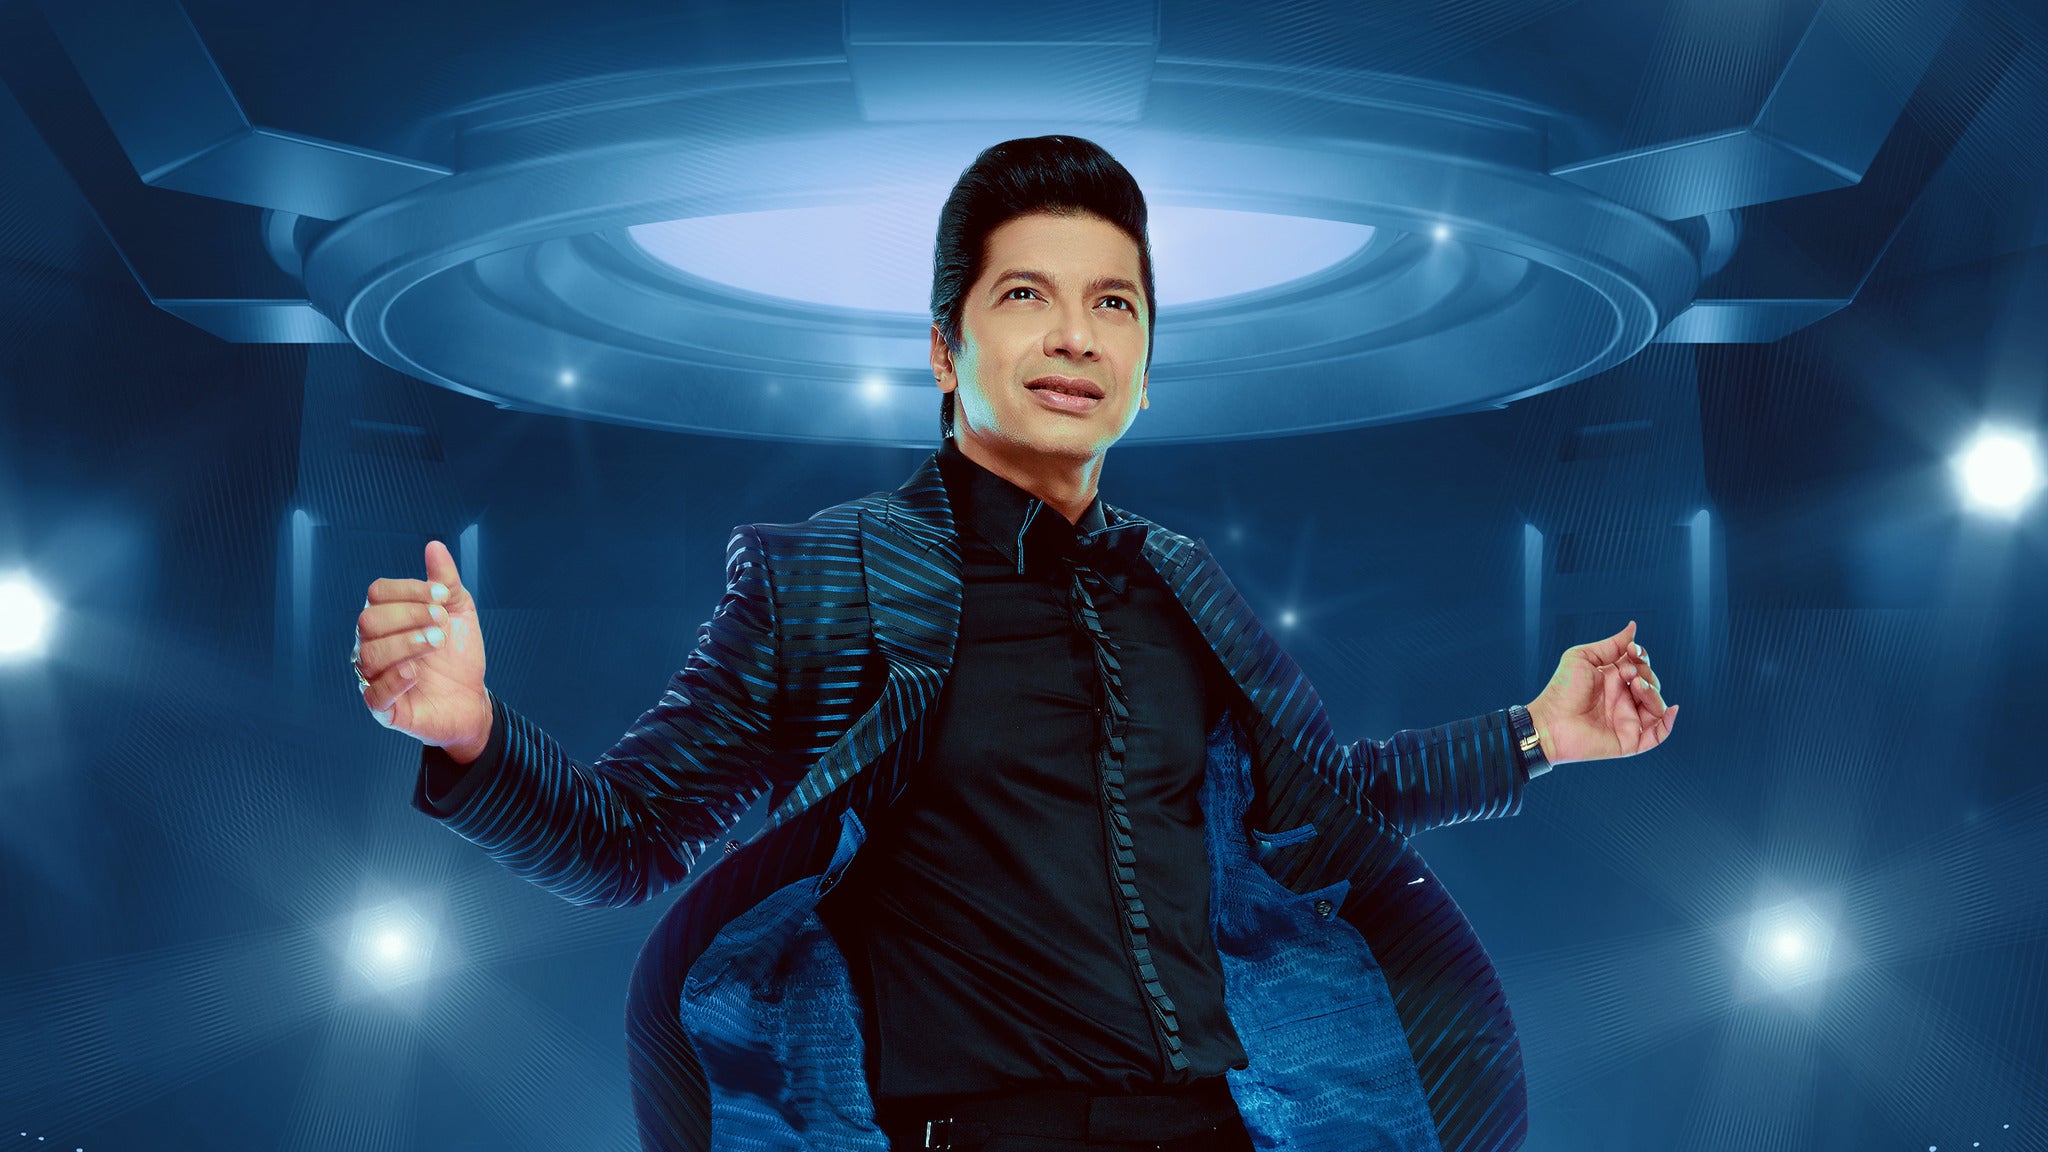 Image used with permission from Ticketmaster | Shaan Love in Concert tickets